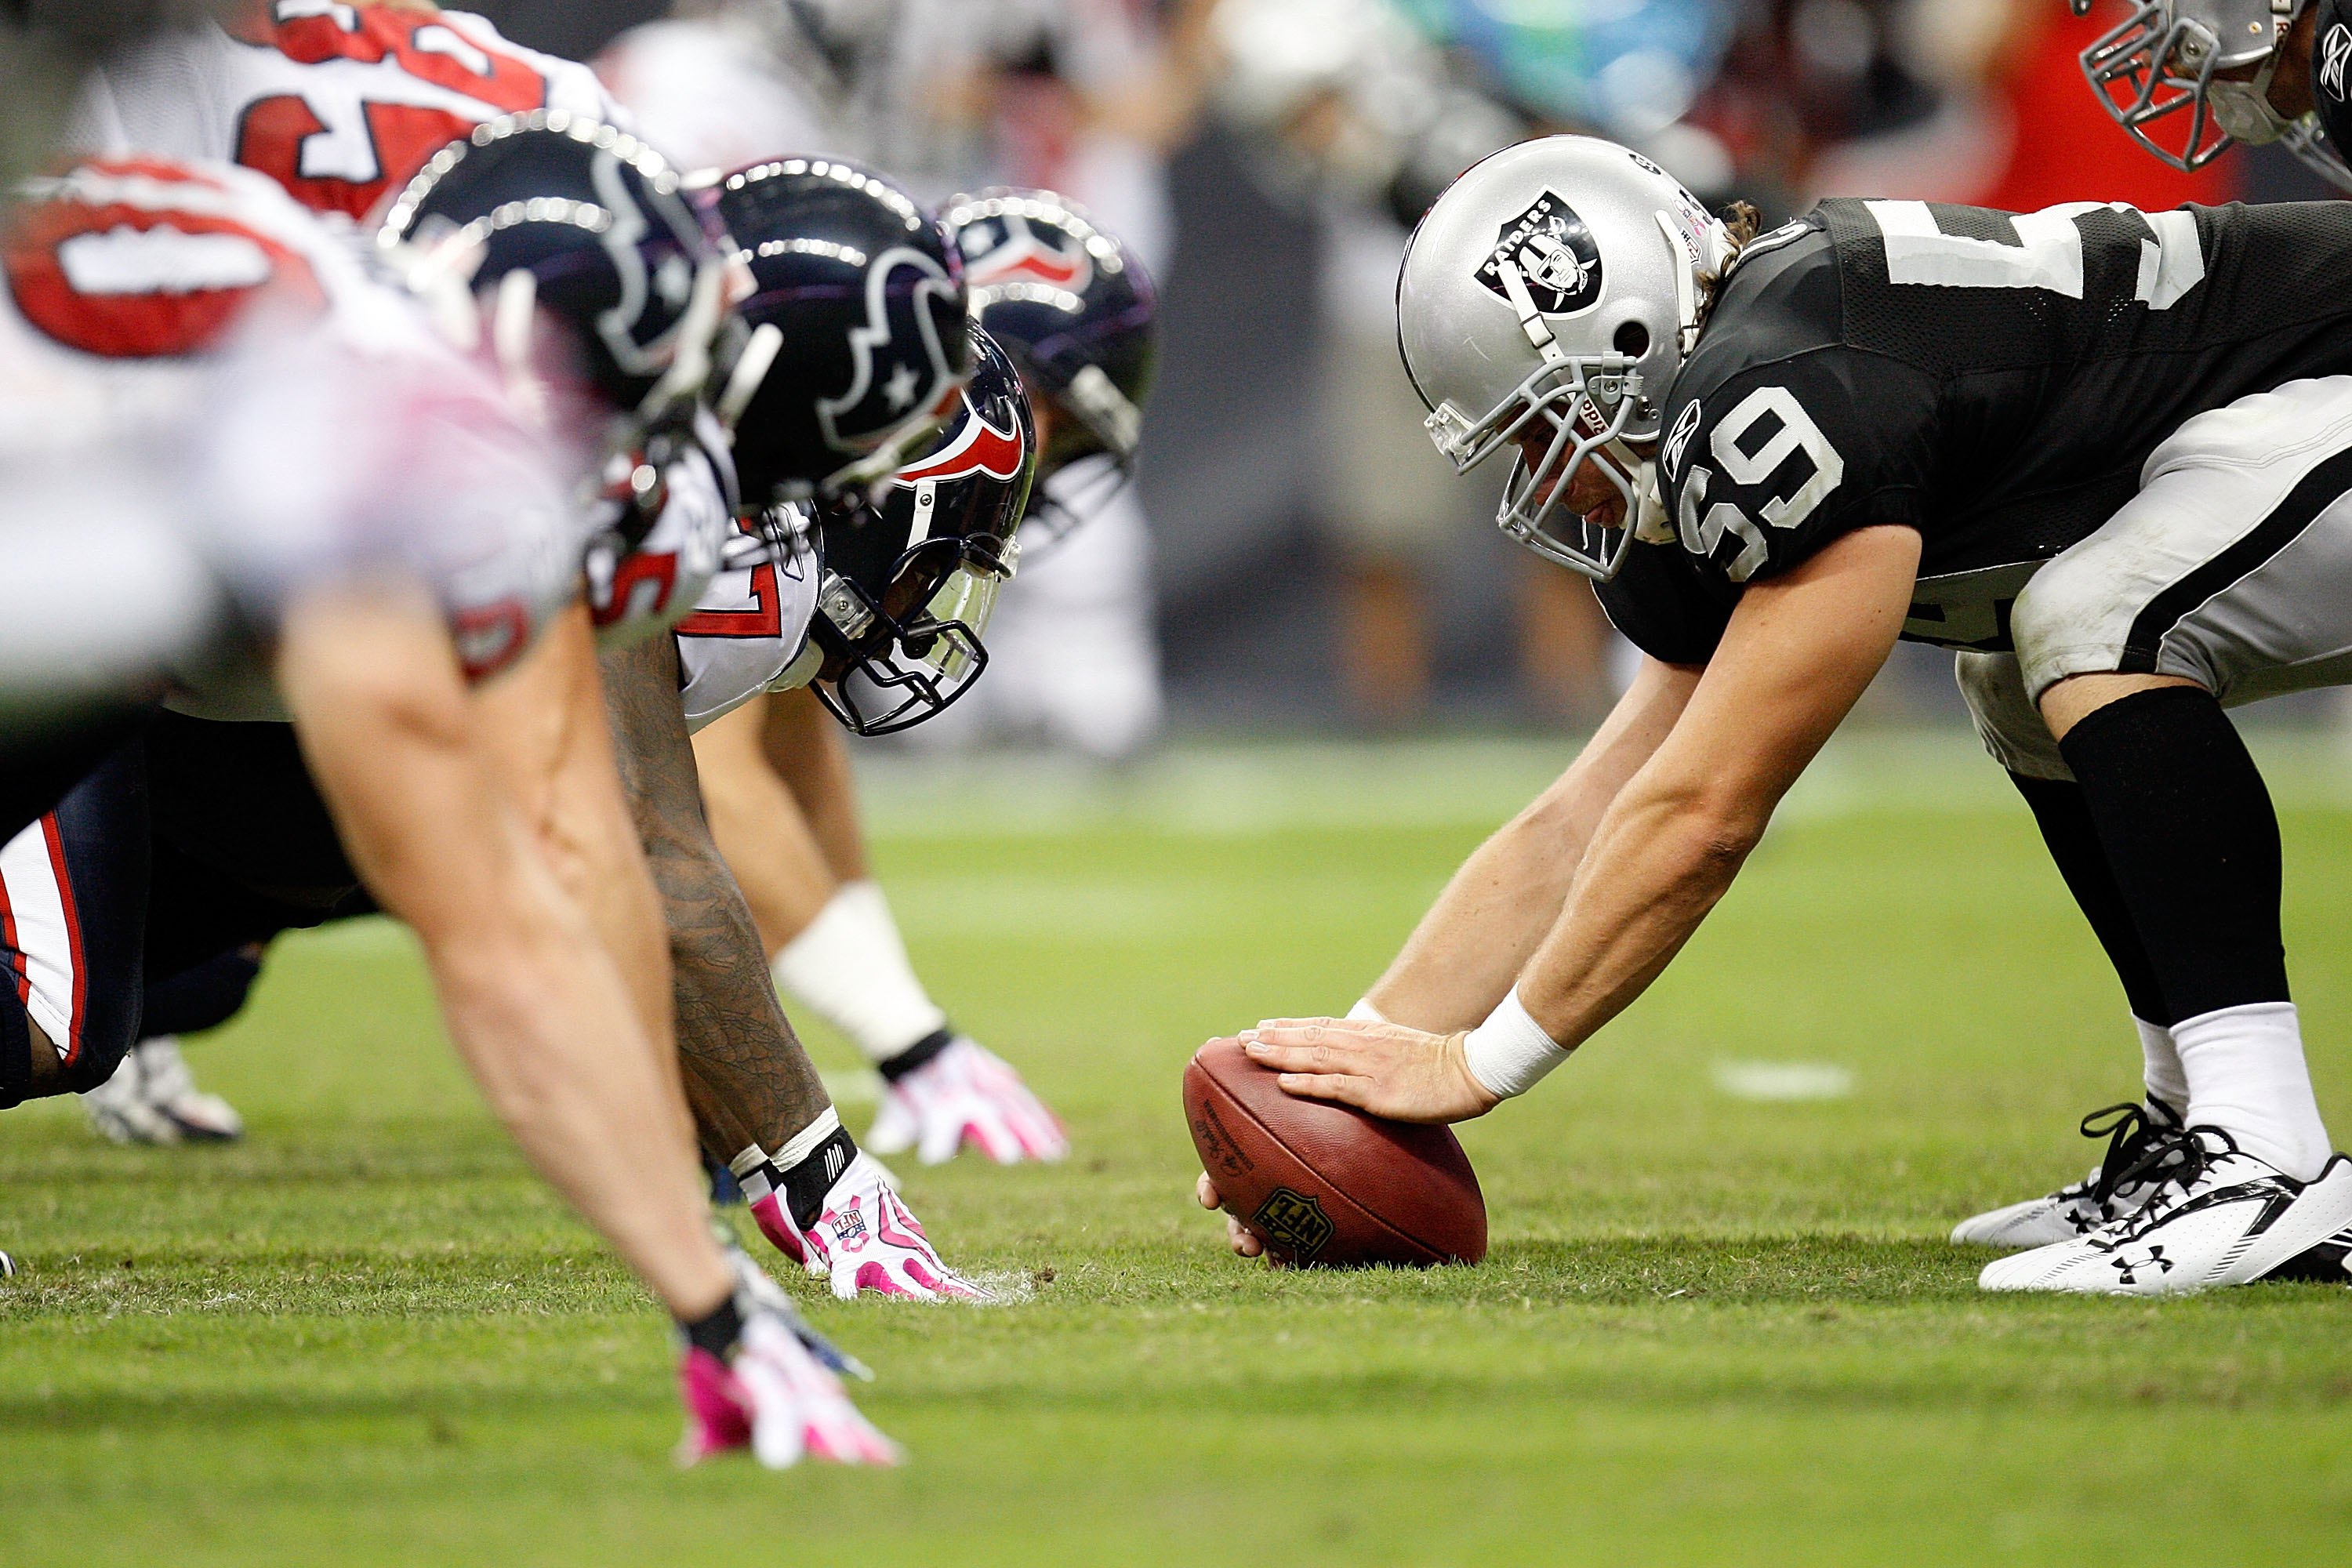 Texans Vs Raiders: 10 Things Oakland Fans Should Know About